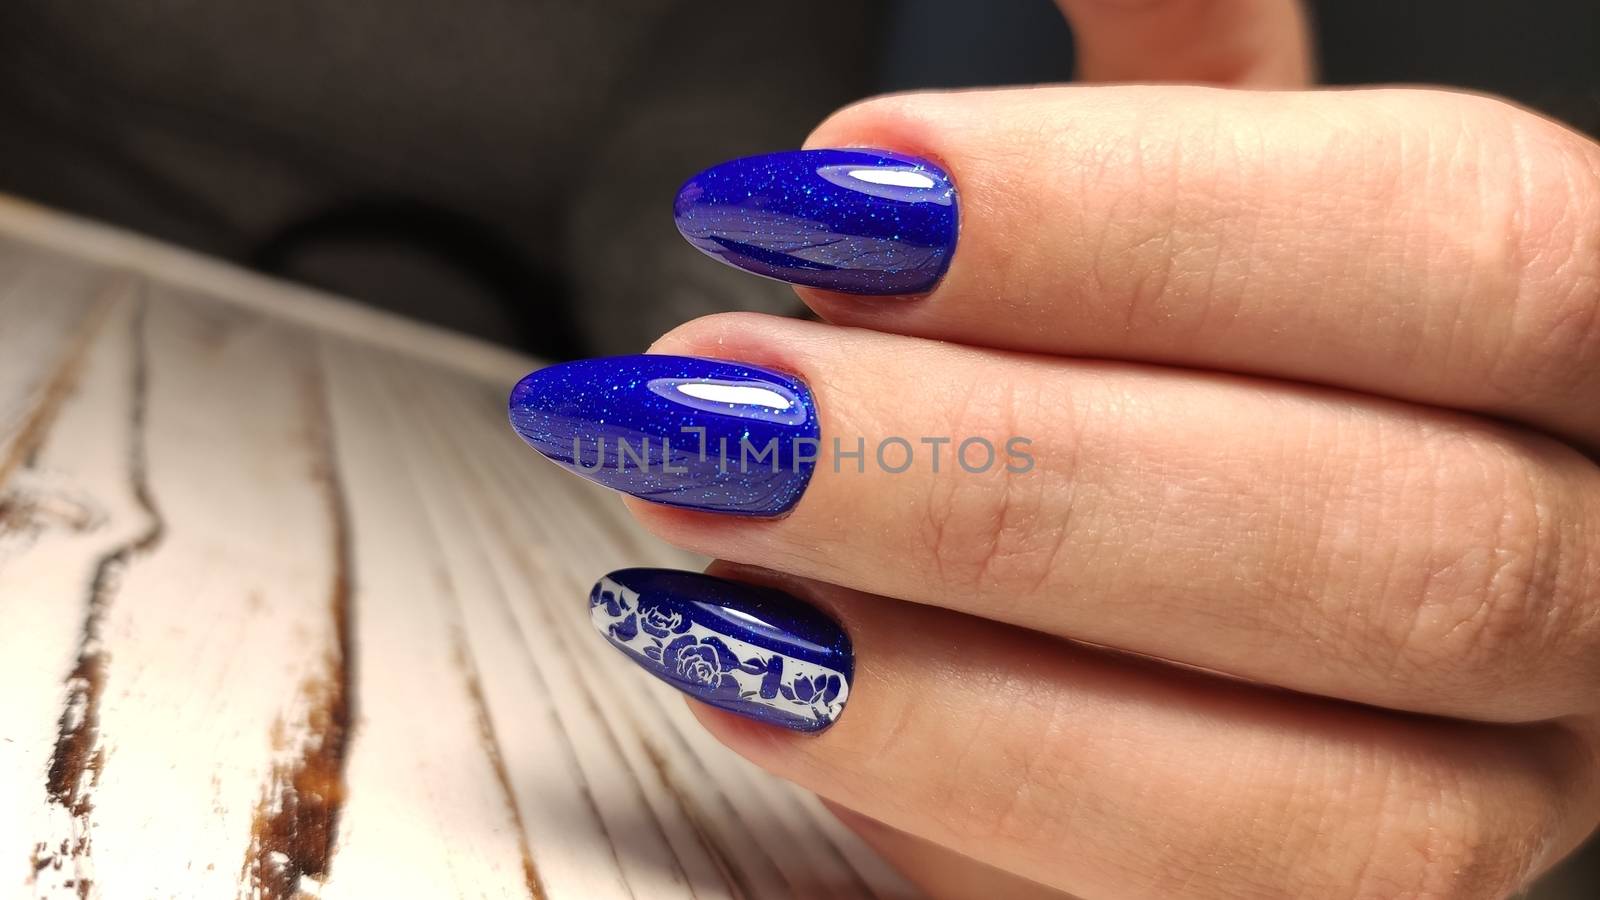 Fashionable design of manicure on beautiful pens by SmirMaxStock